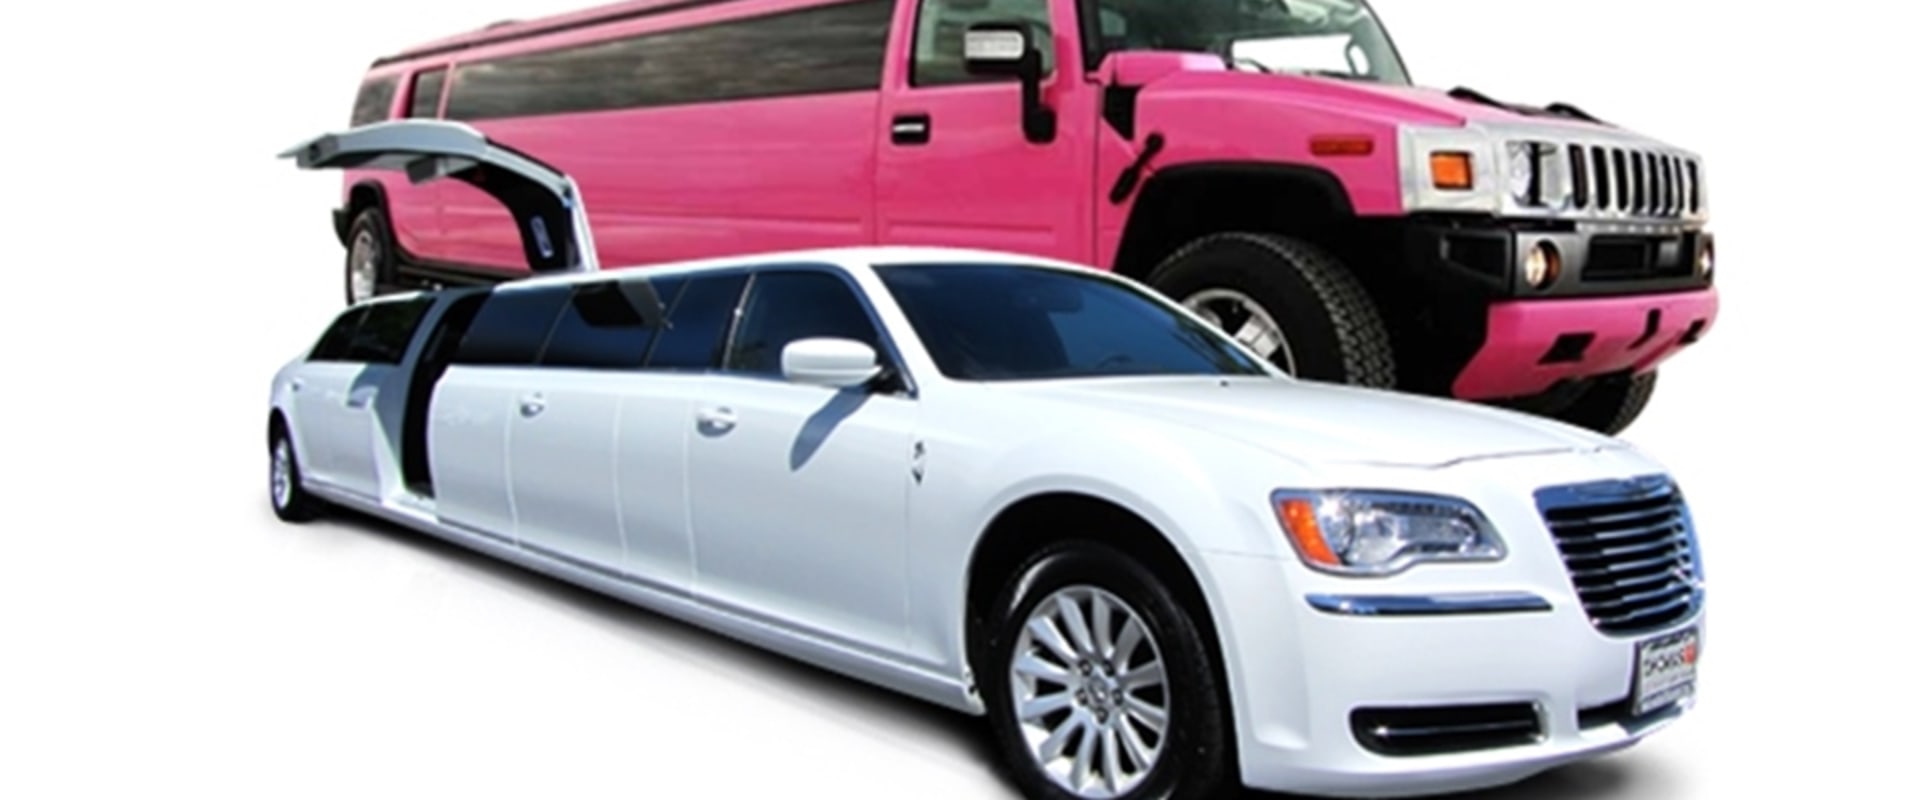 Rent a Limousine in Fort Worth for a Memorable Trip